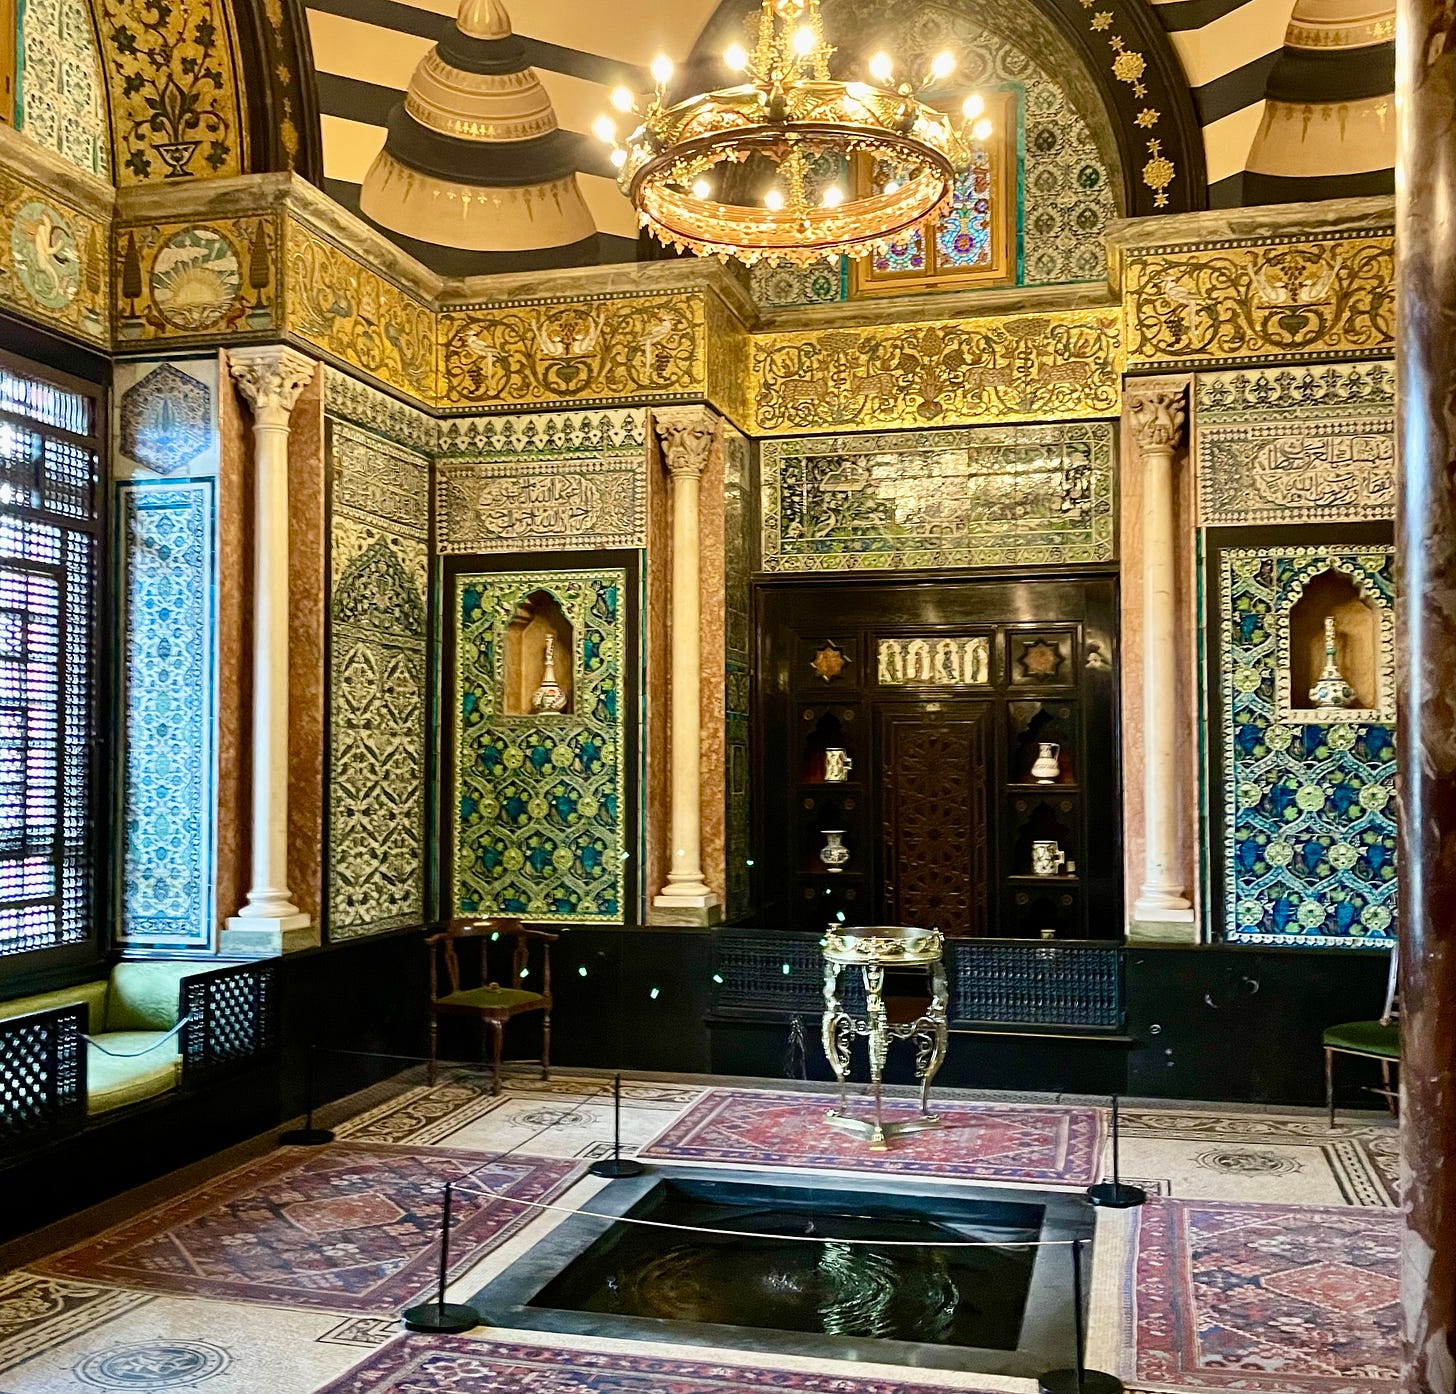 The dazzling Arab Hall with pool and tiles